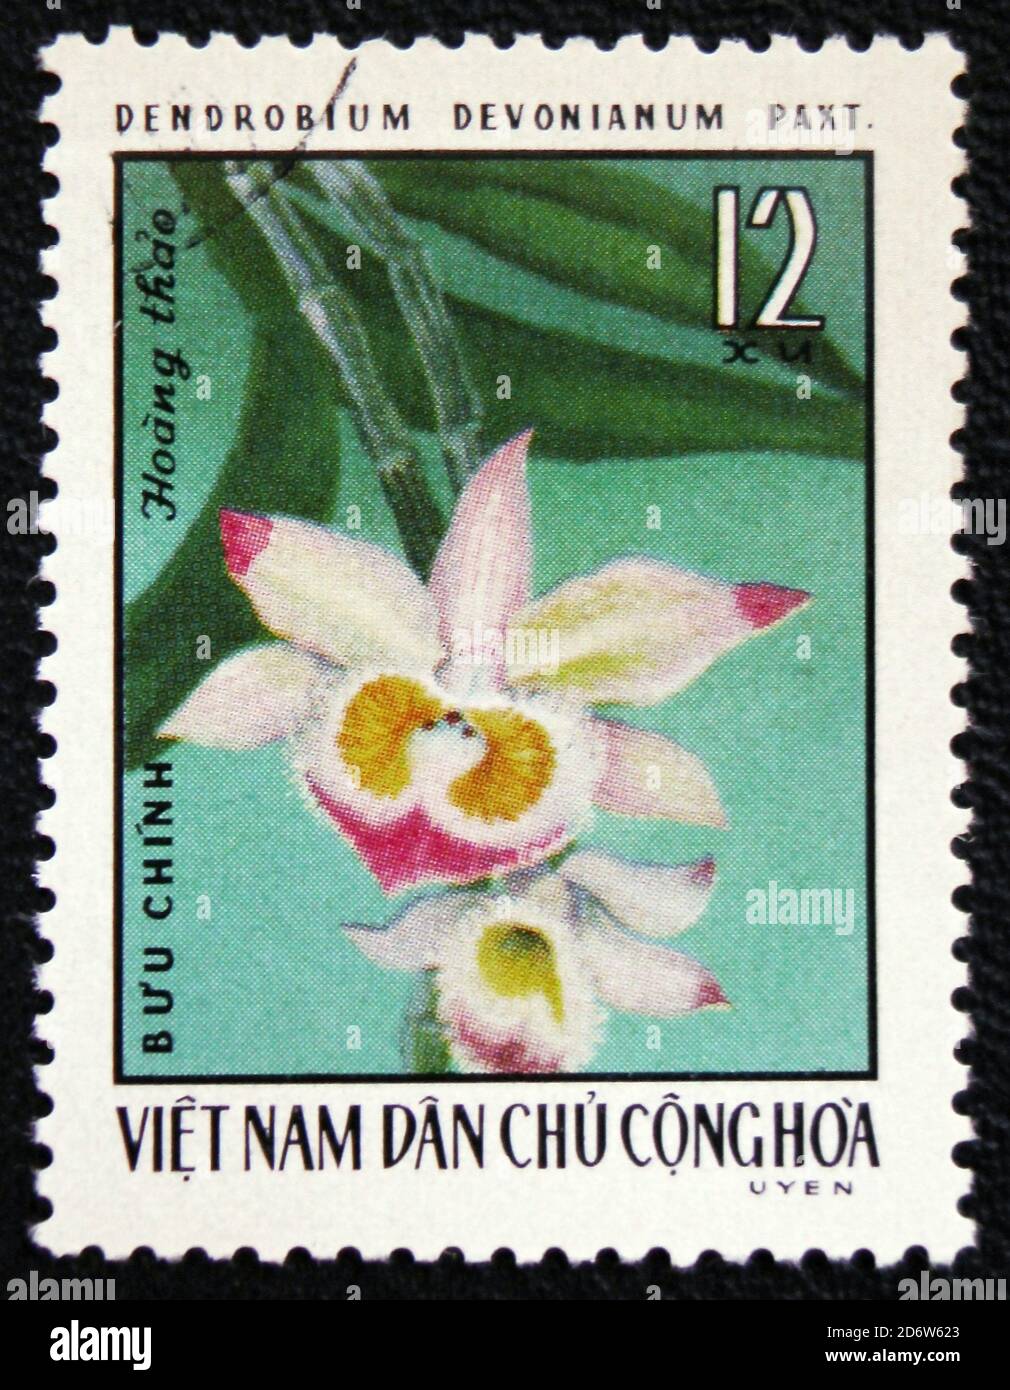 MOSCOW, RUSSIA - JANUARY 7, 2017: A stamp printed in Vietnam shows orchid Dendrobium devonianum, circa 1976 Stock Photo